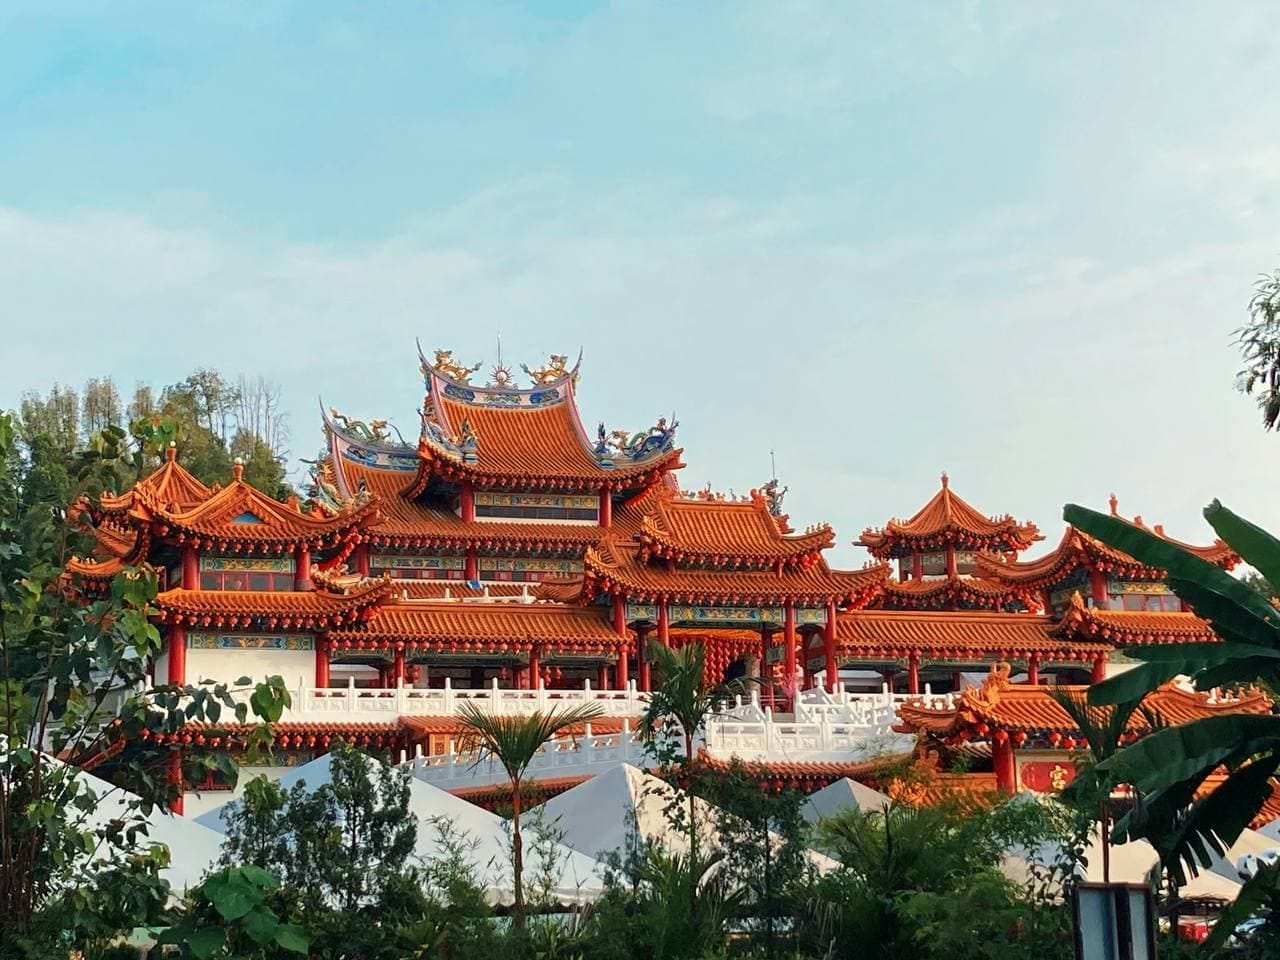 Hainanese temple viewed from a distance.